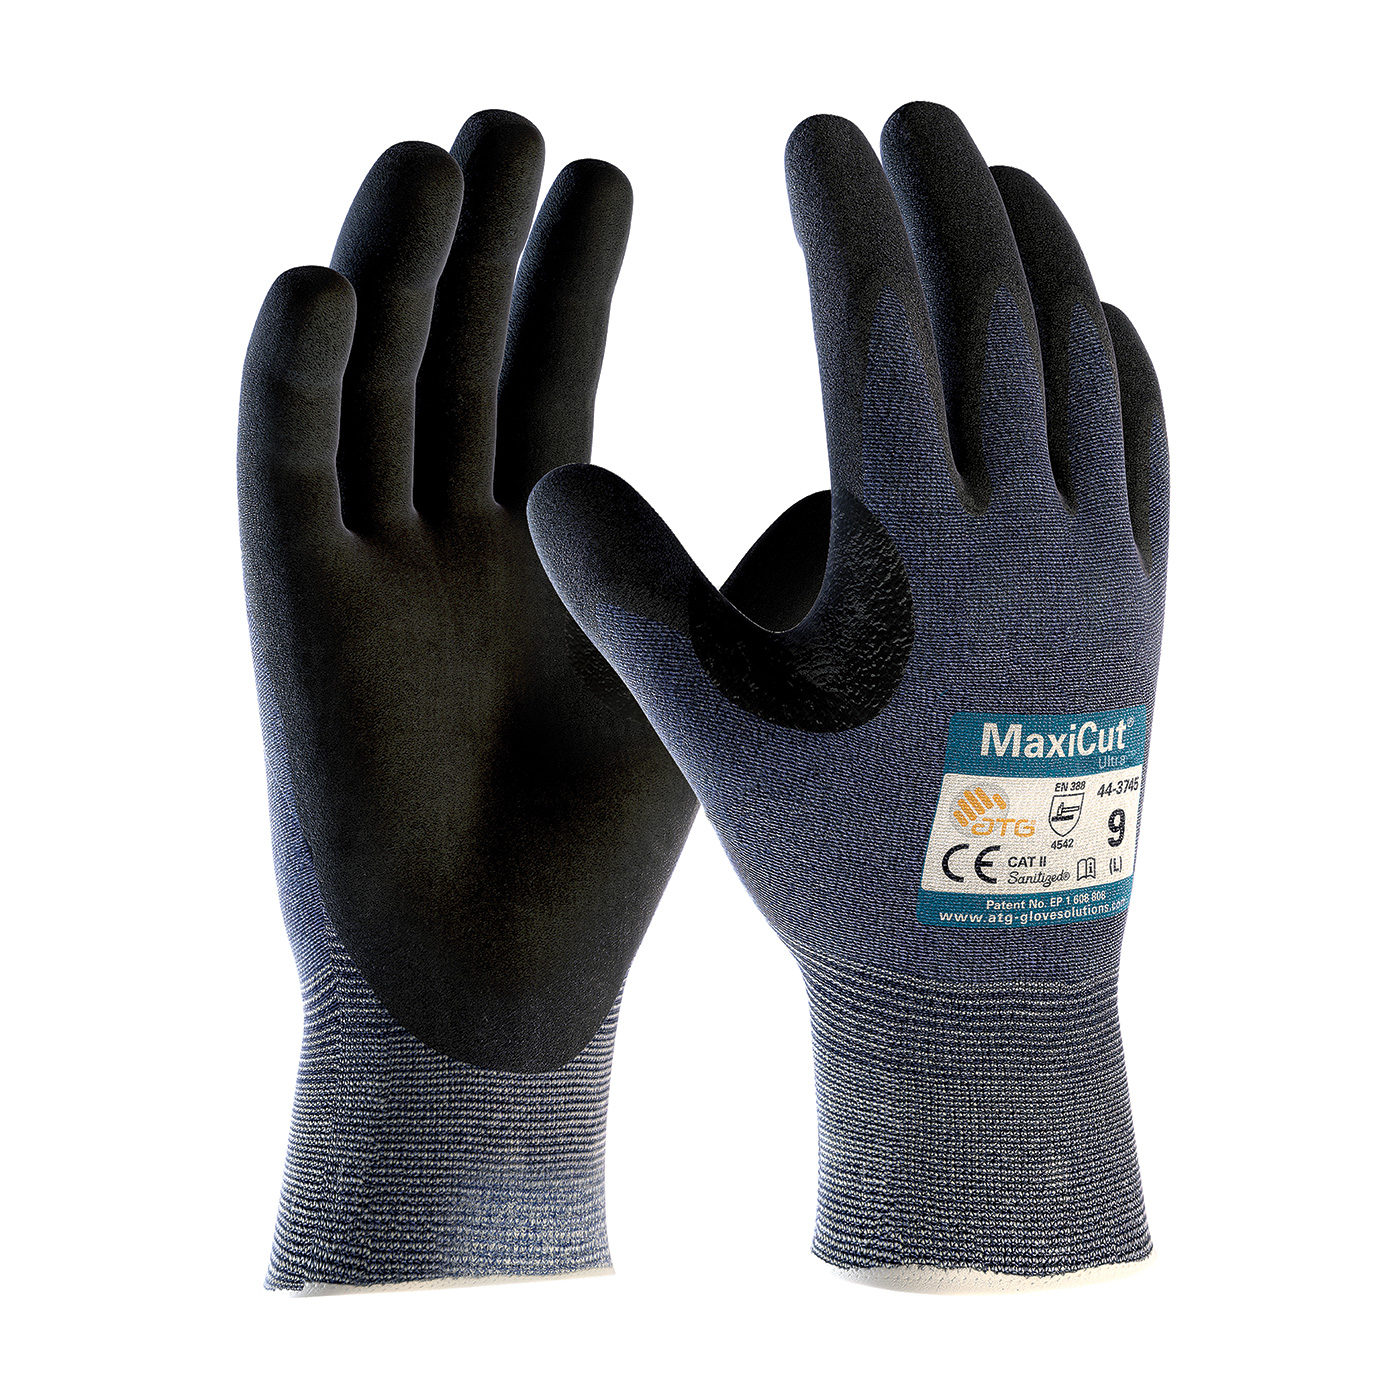 PIP 44-3745/L MaxiCut Ultra Seamless Knit Engineered Yarn Glove with Premium Nitrile Coated MicroFoam Grip on Palm & Fingers - Large PID-44 3745 L